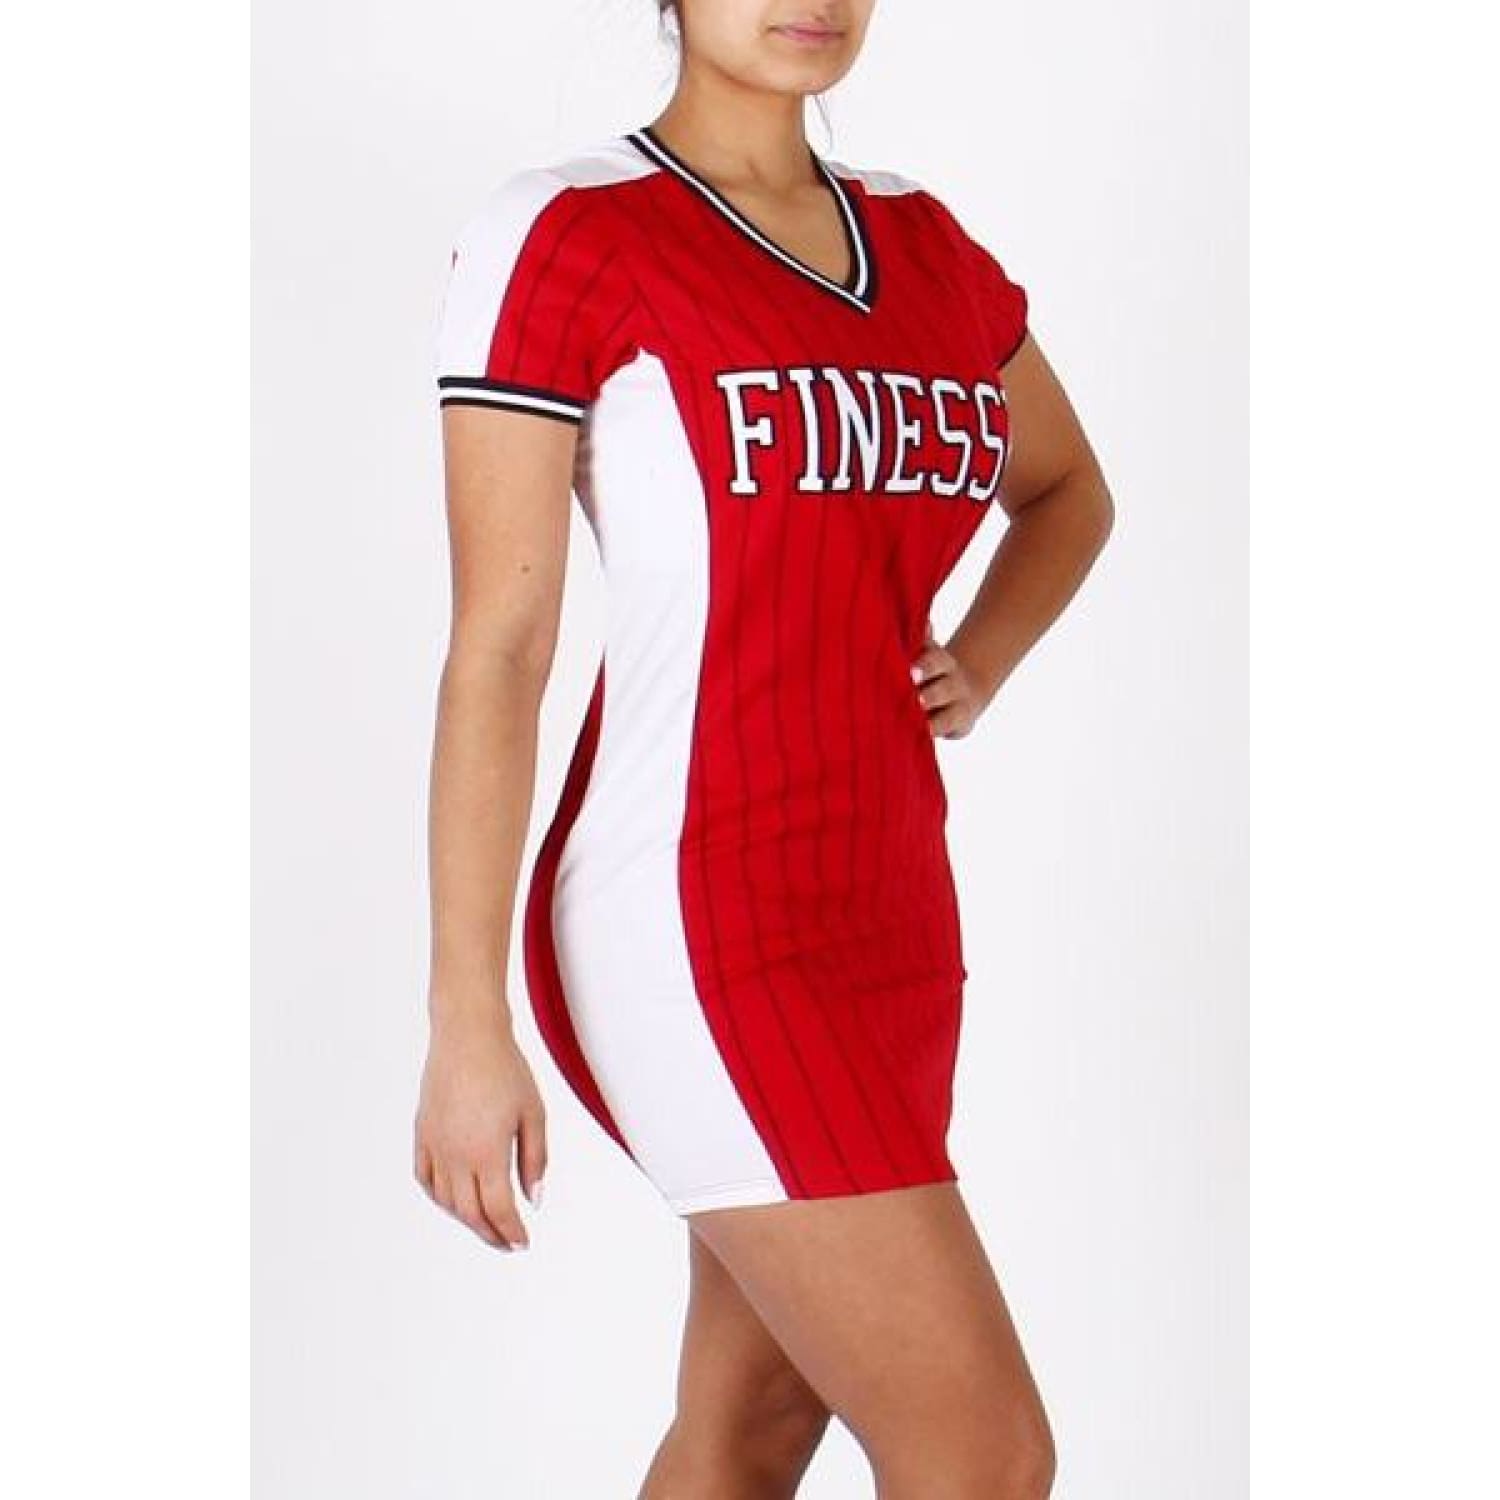 FINESSE Jersey Dress – Best YOU by HTS